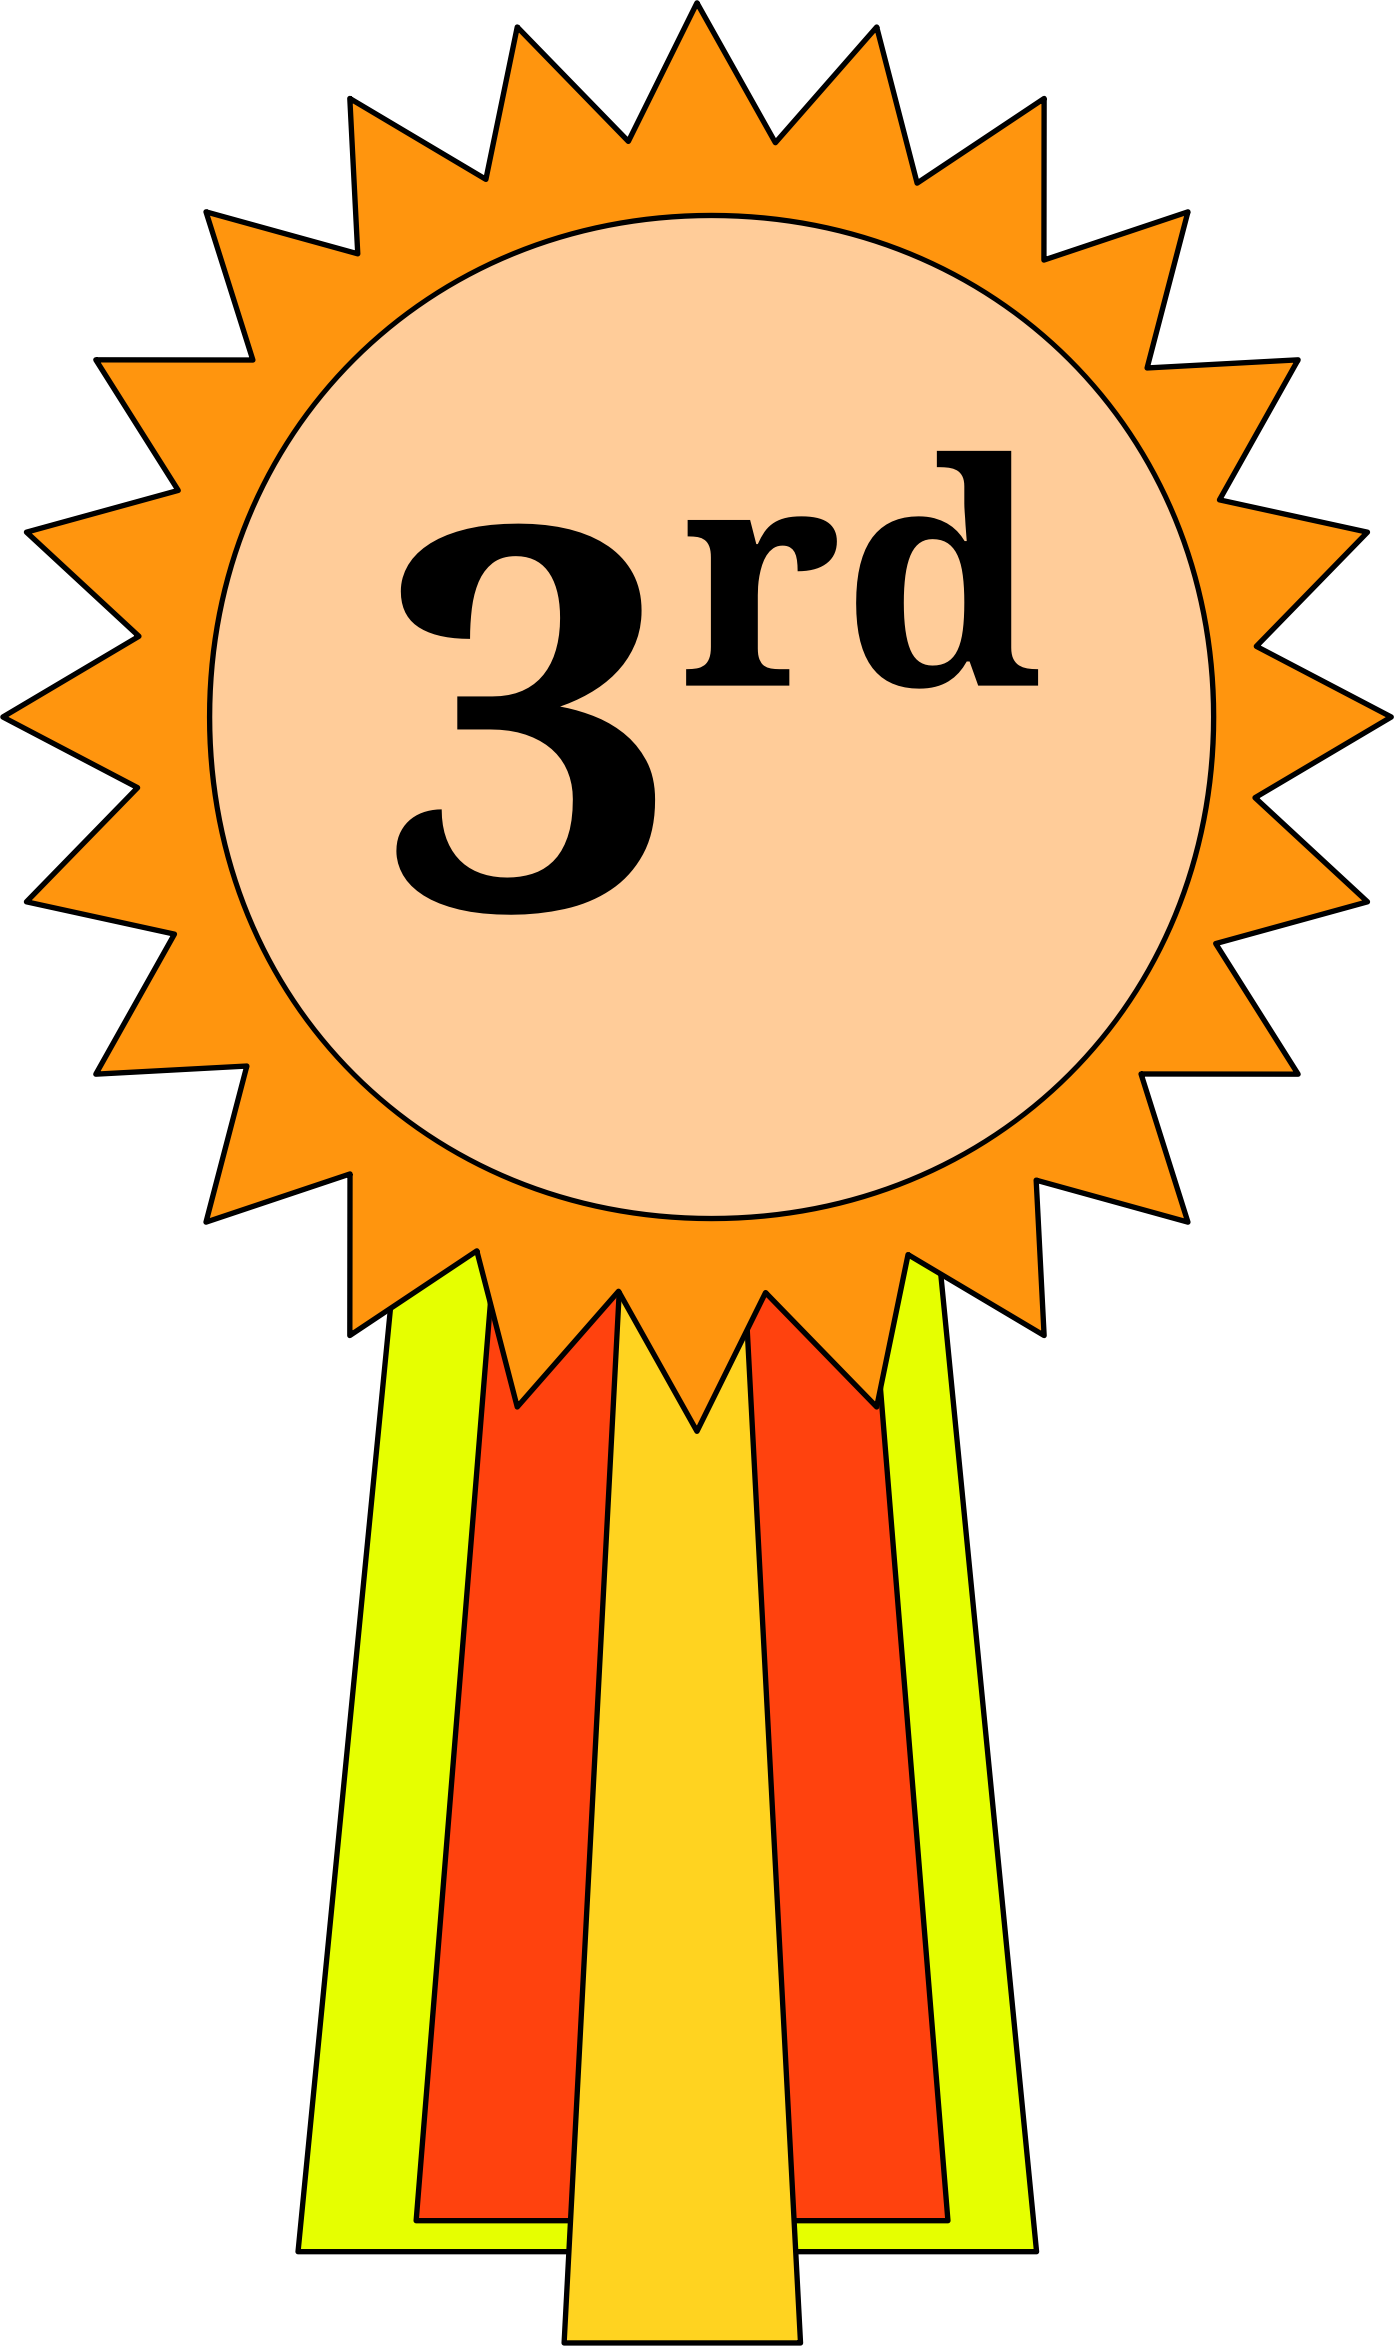 1st 2nd 3rd Place Ribbon Clipart.